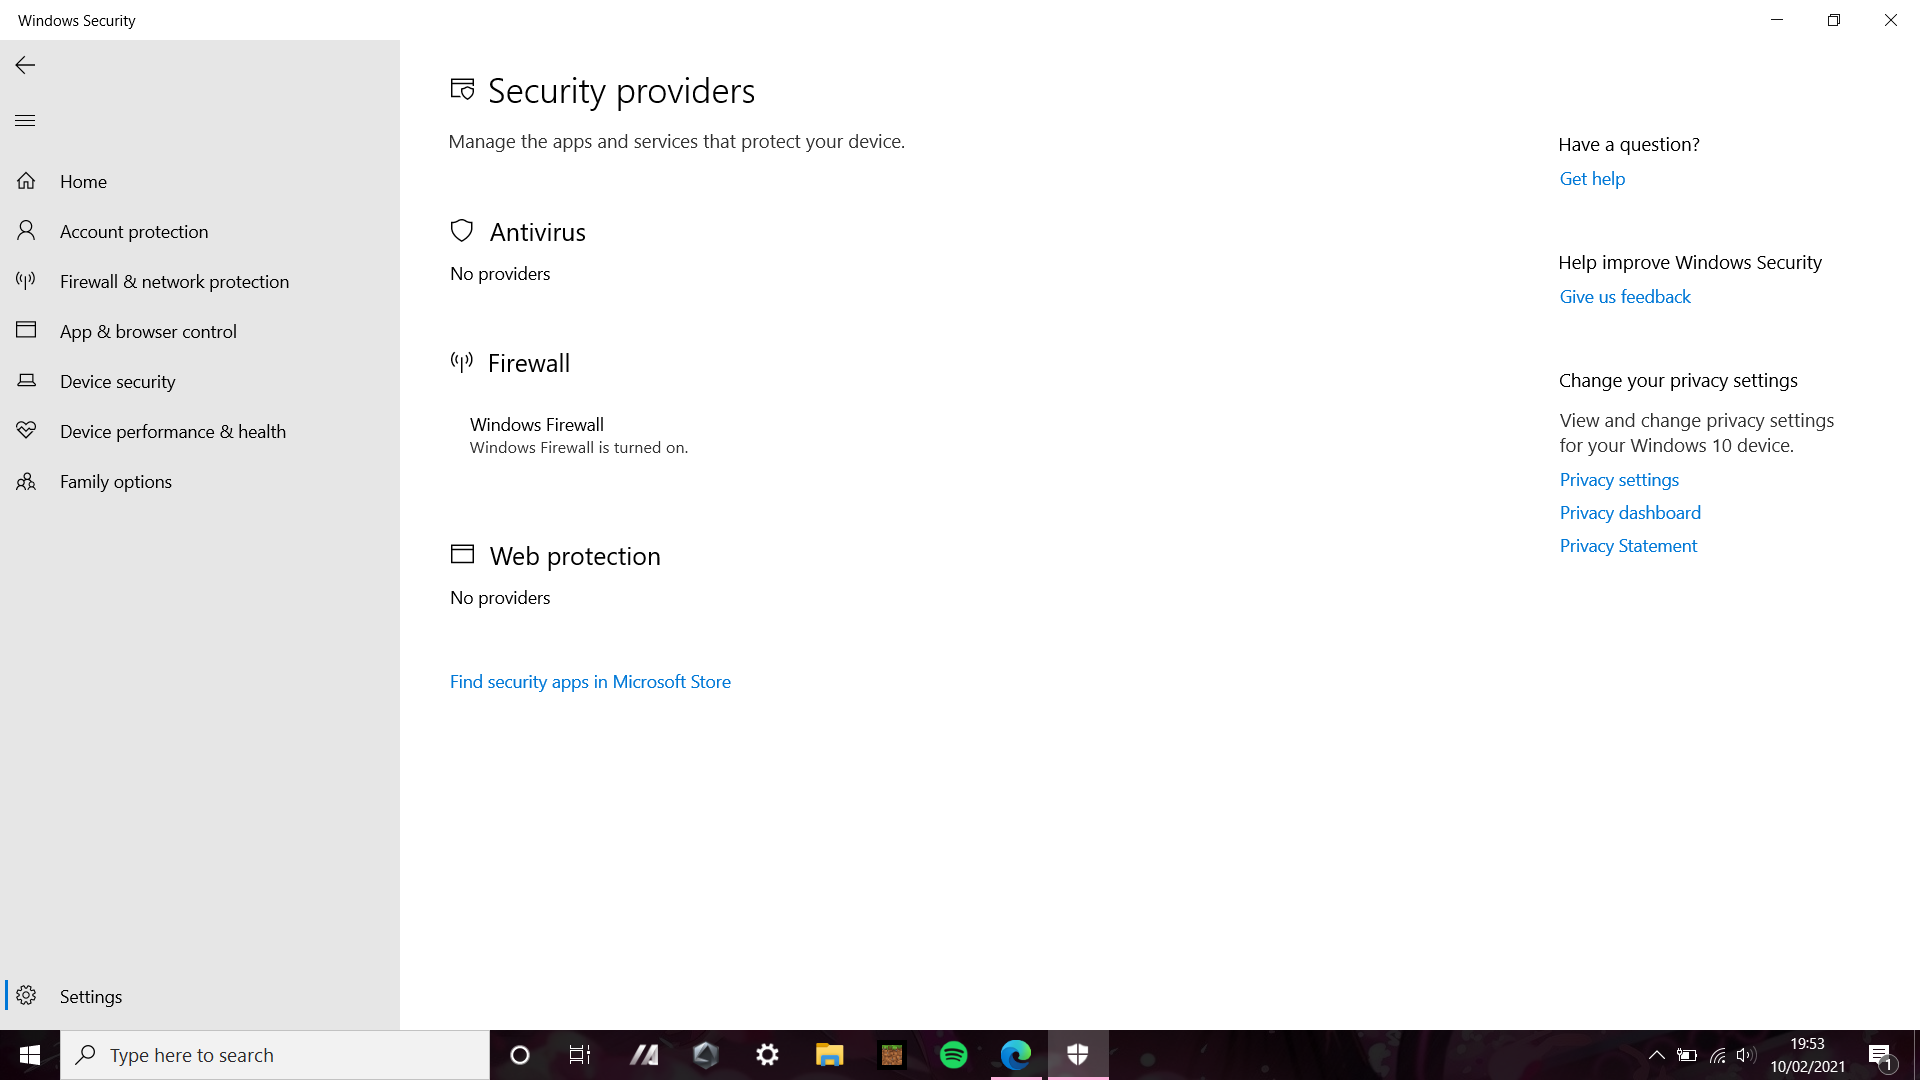 Antivirus not visible on Windows security app and no providers. 0cc50980-0ddd-4585-802f-02fd431f92dd?upload=true.png